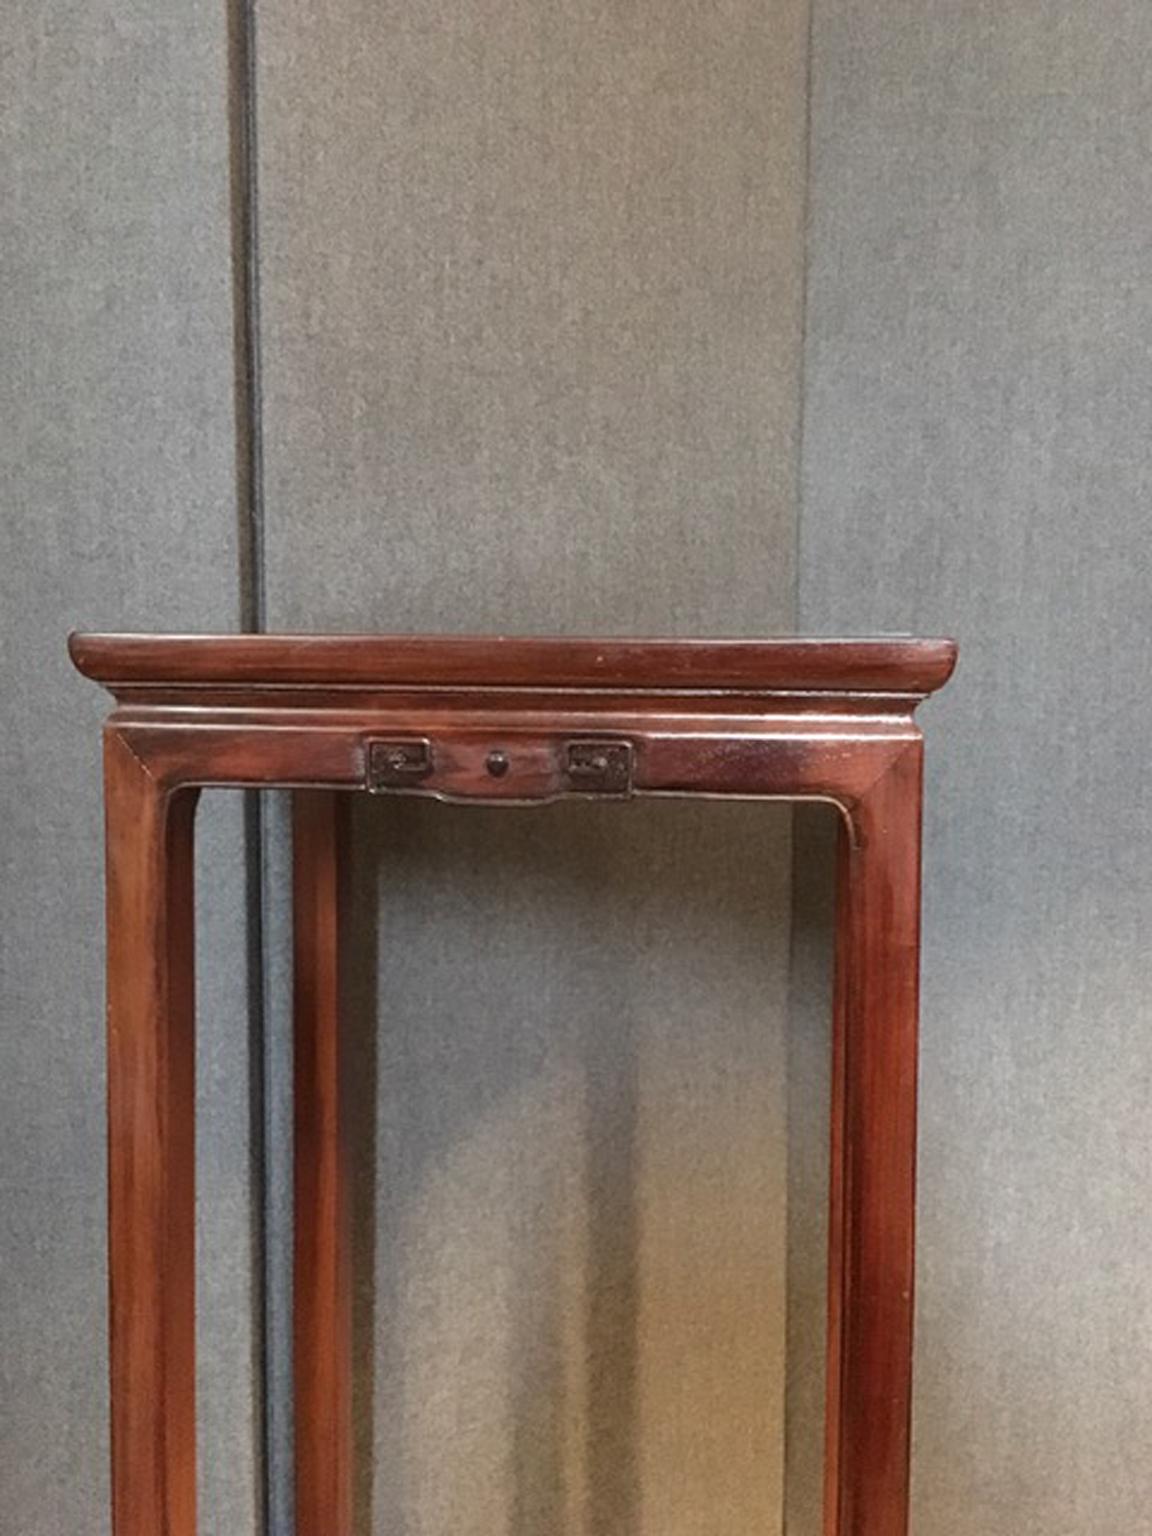 China elmwood pedestal hand carved with fine hand carved details on every sides. The wood color finish is similar to mahogany.